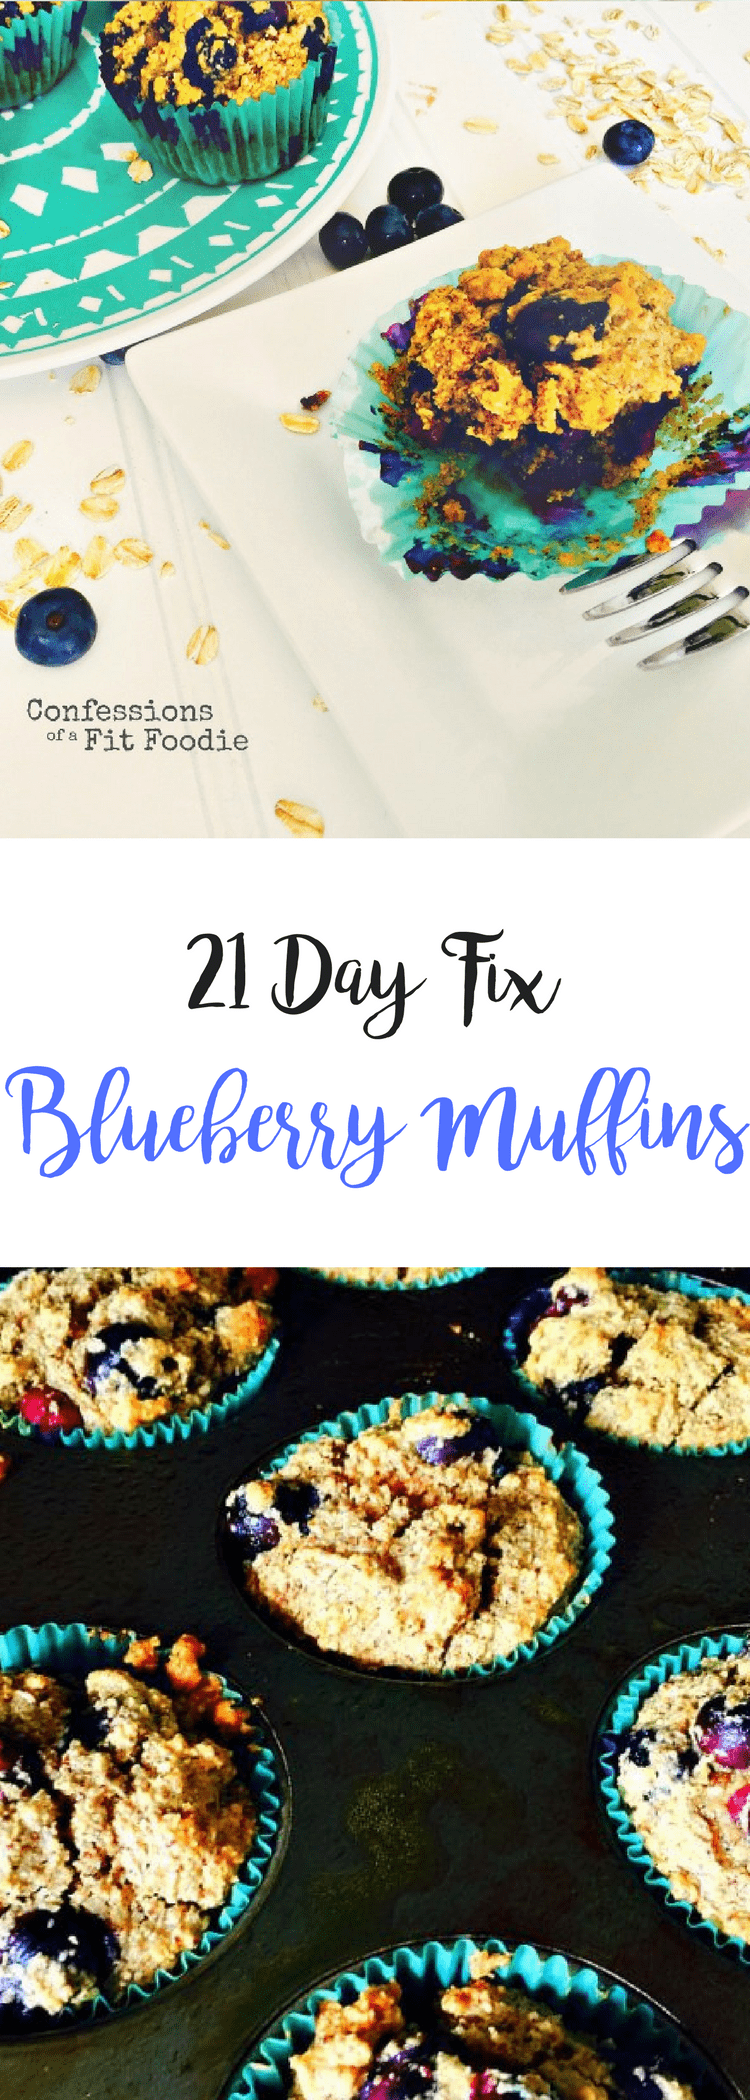 21 Day Fix Blueberry Muffins {Gluten Free, Dairy Free} | Confessions of a Fit Foodie